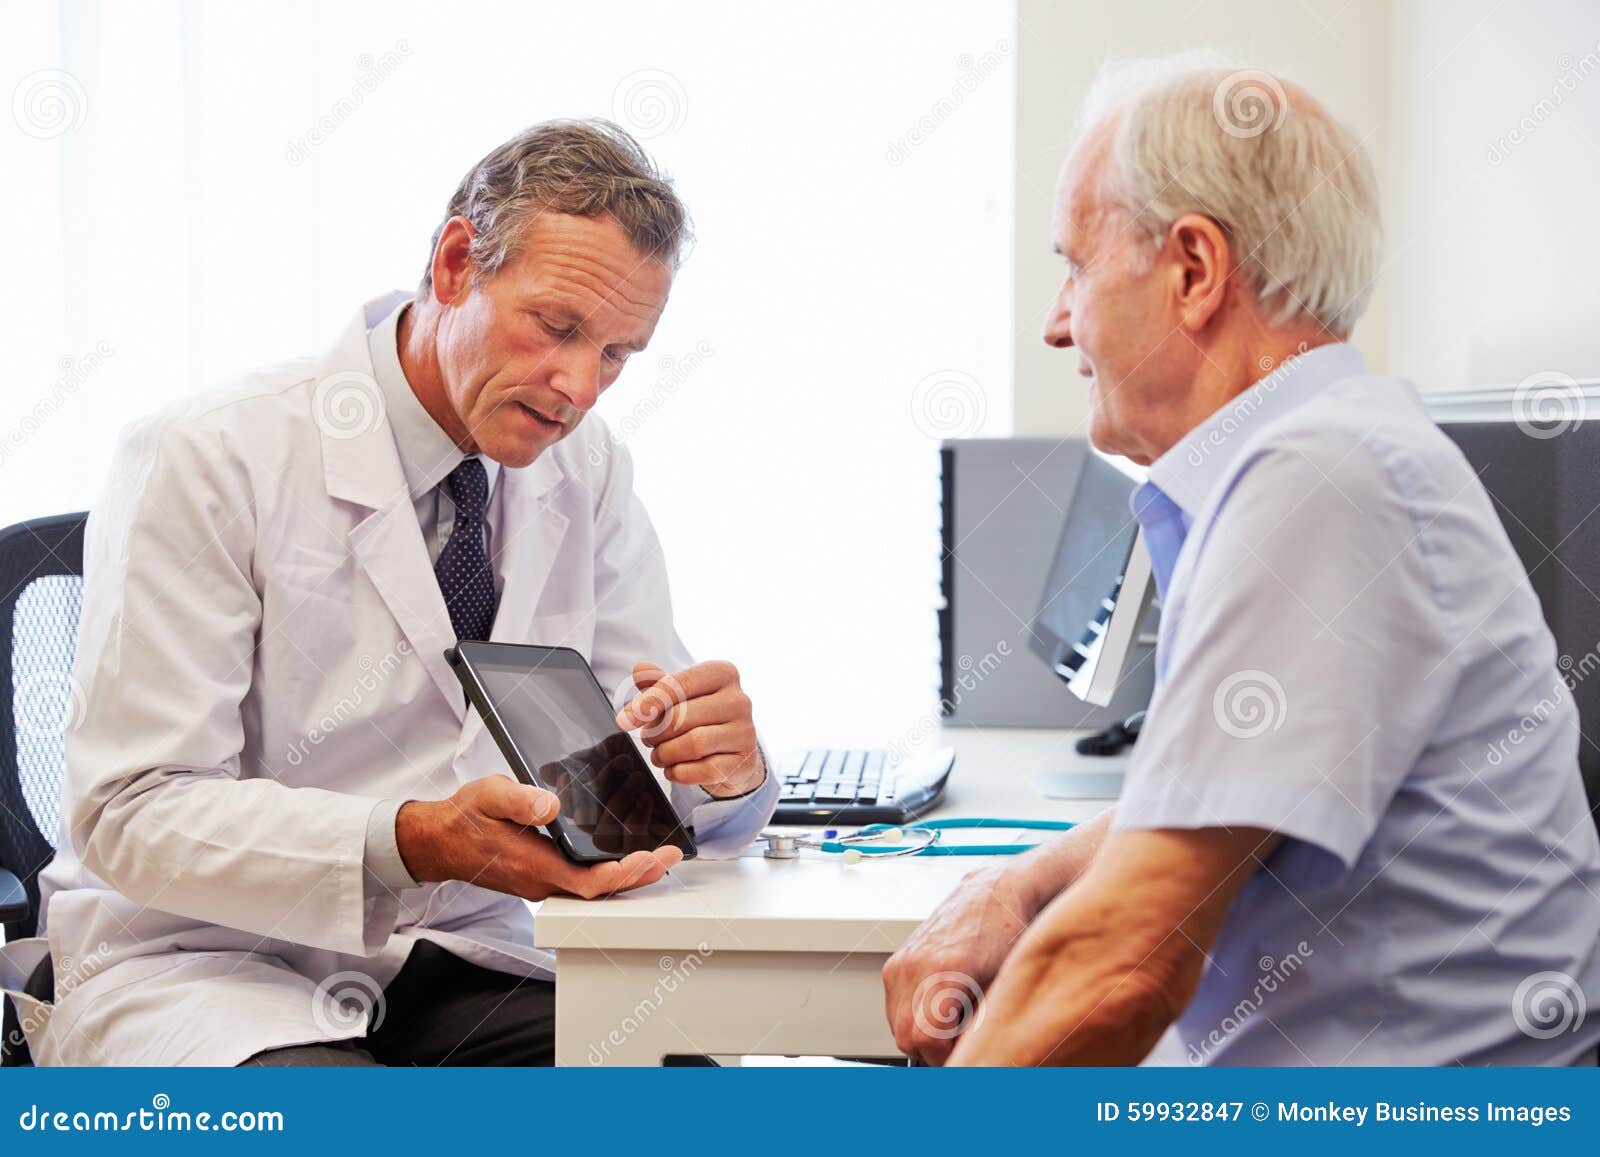 senior patient having consultation with doctor in office